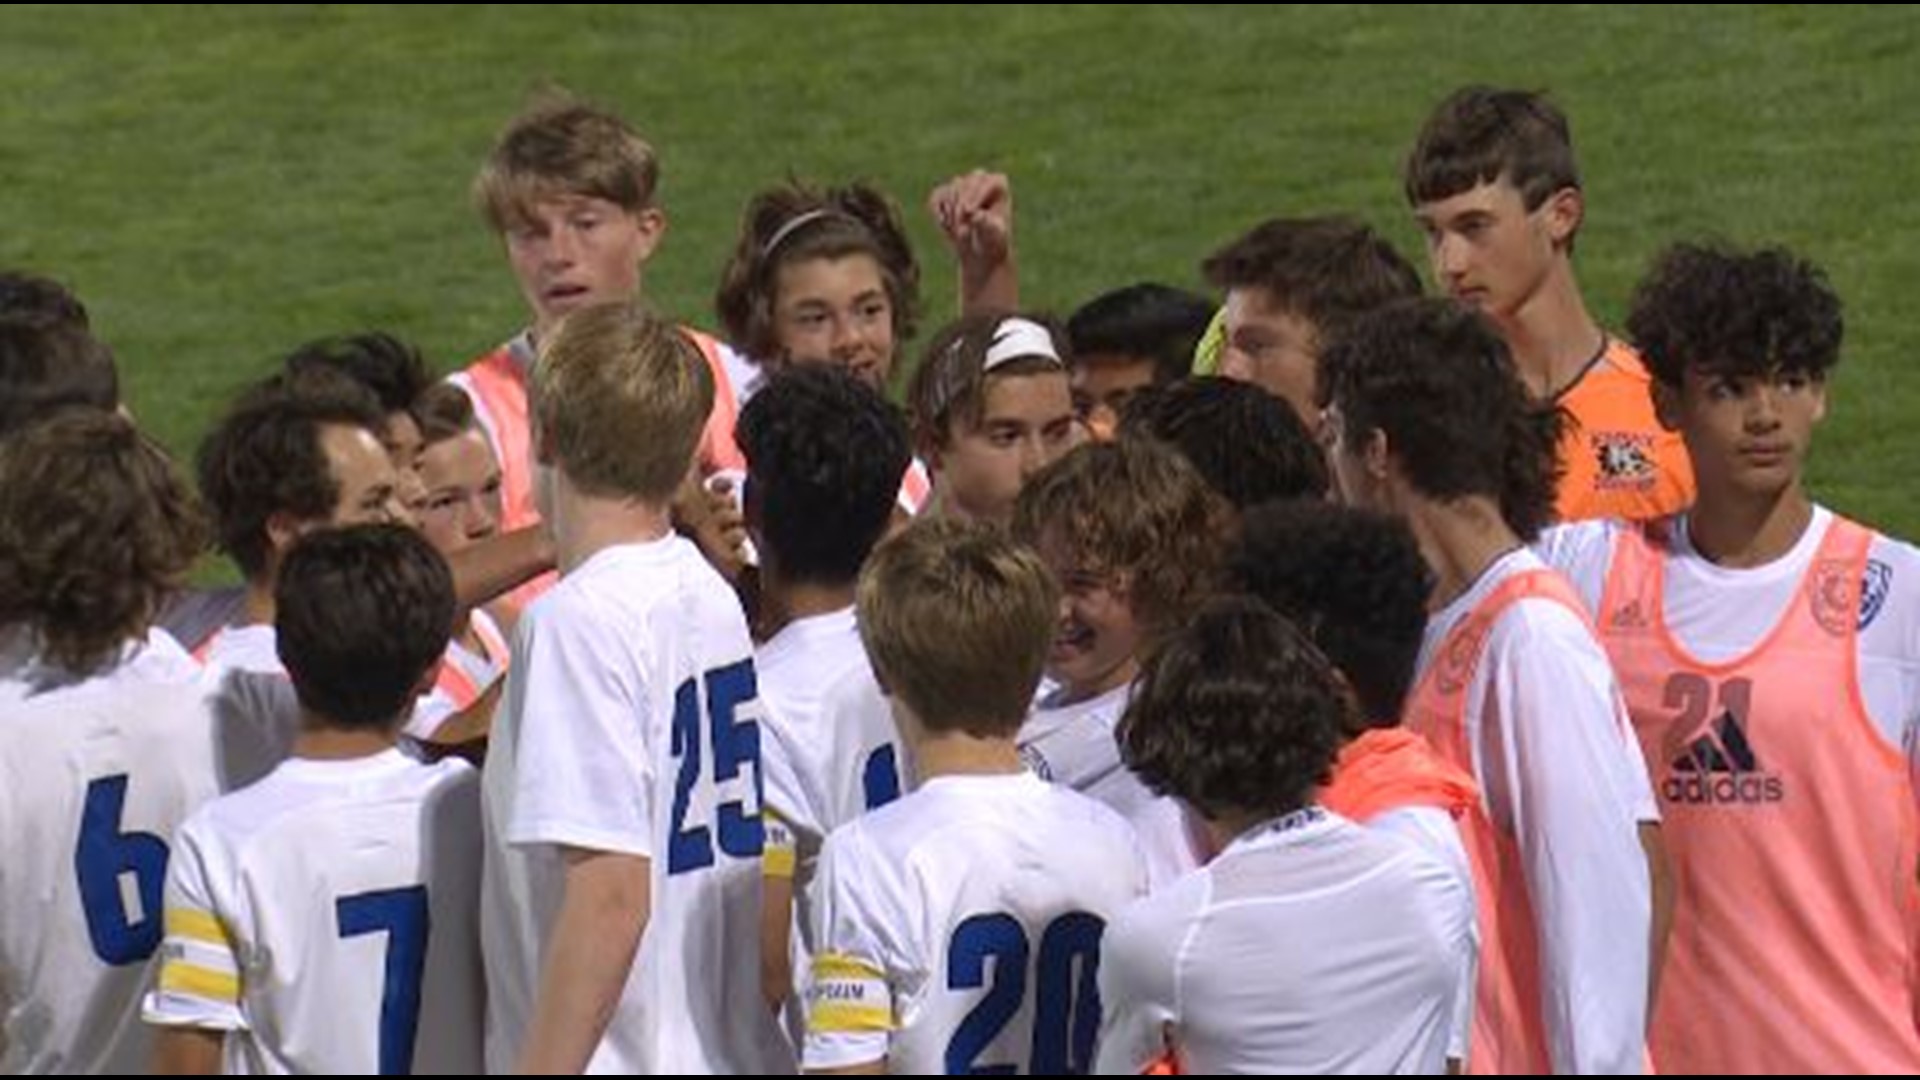 The number two Grandview boys soccer team shut out the number nine Arvada West team Thursday night 2-0.